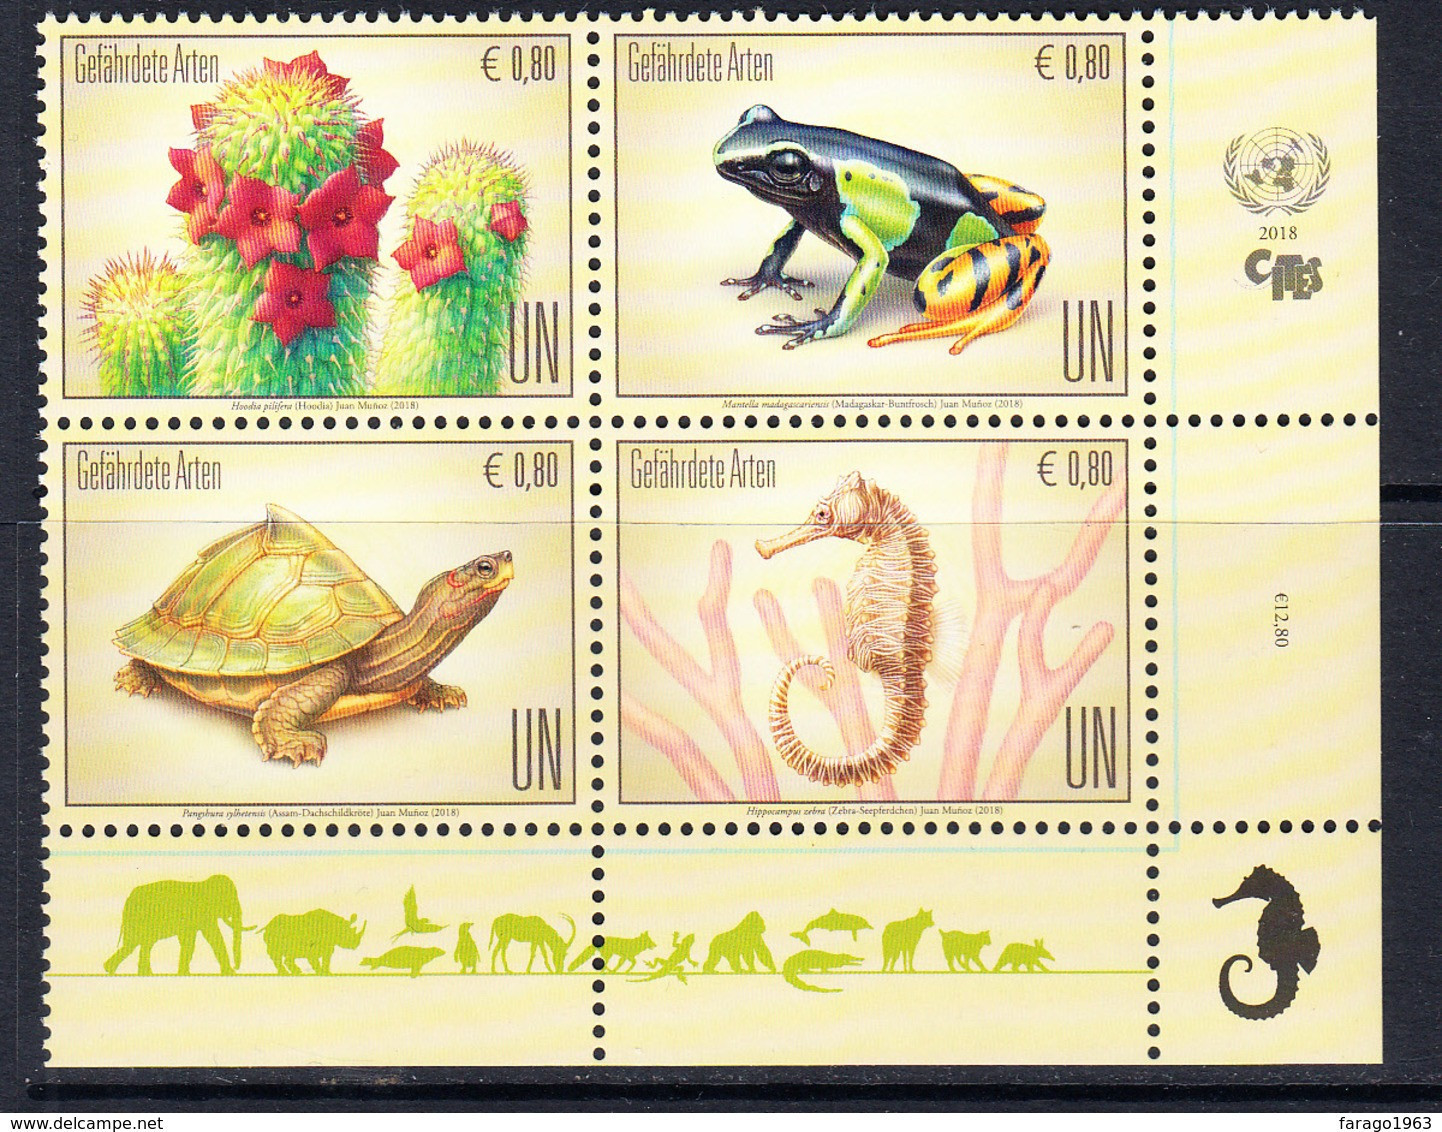 2018 United Nations Vienna CITES Endangered Reptiles Frogs Turtles  Complete Block Of 4  MNH @ BELOW FACE VALUE - Unused Stamps